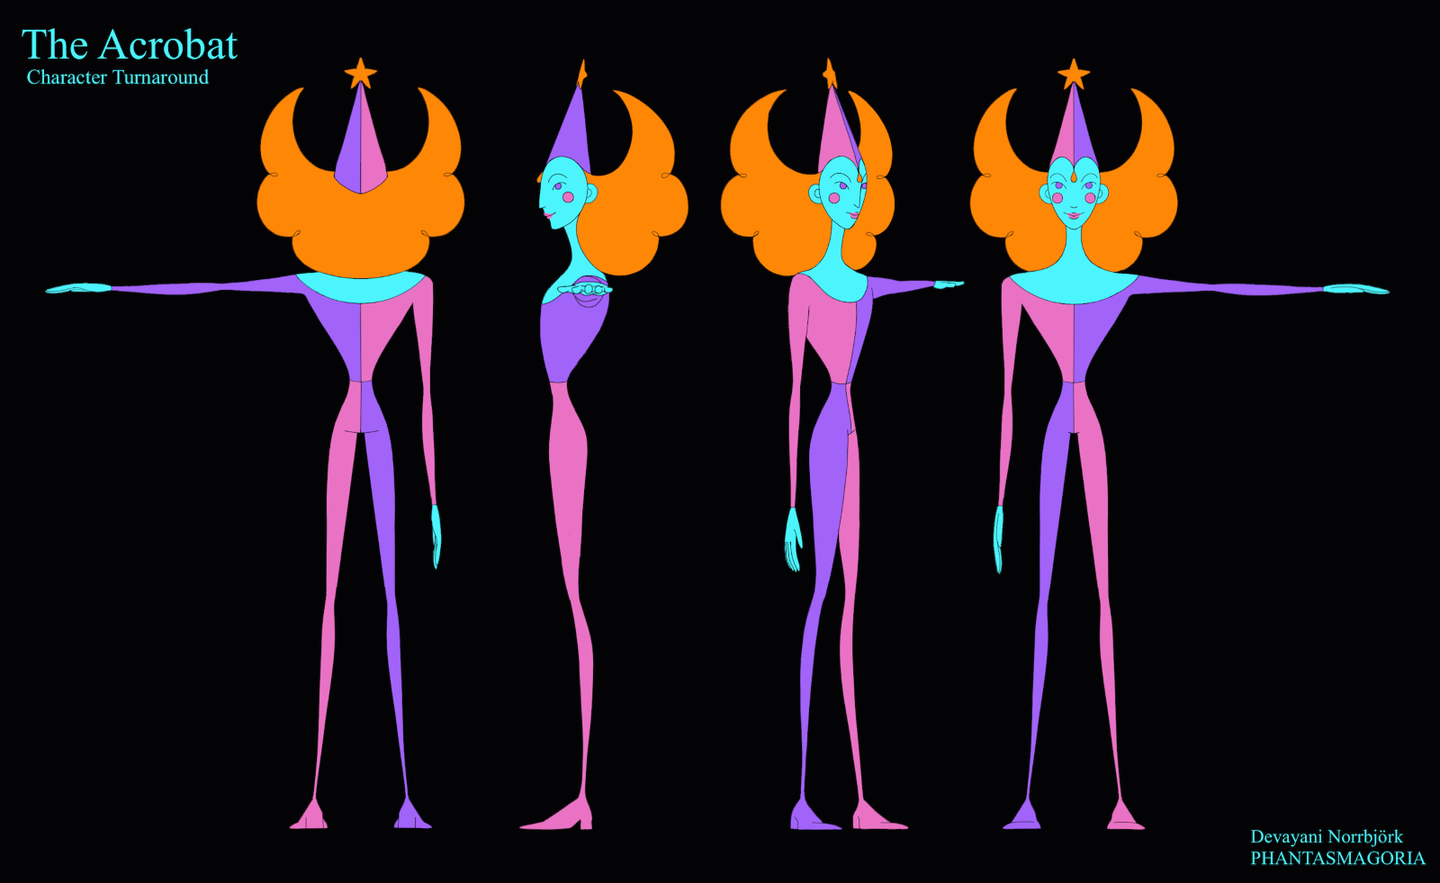 Drawings of an acrobat from different angles on a black background.